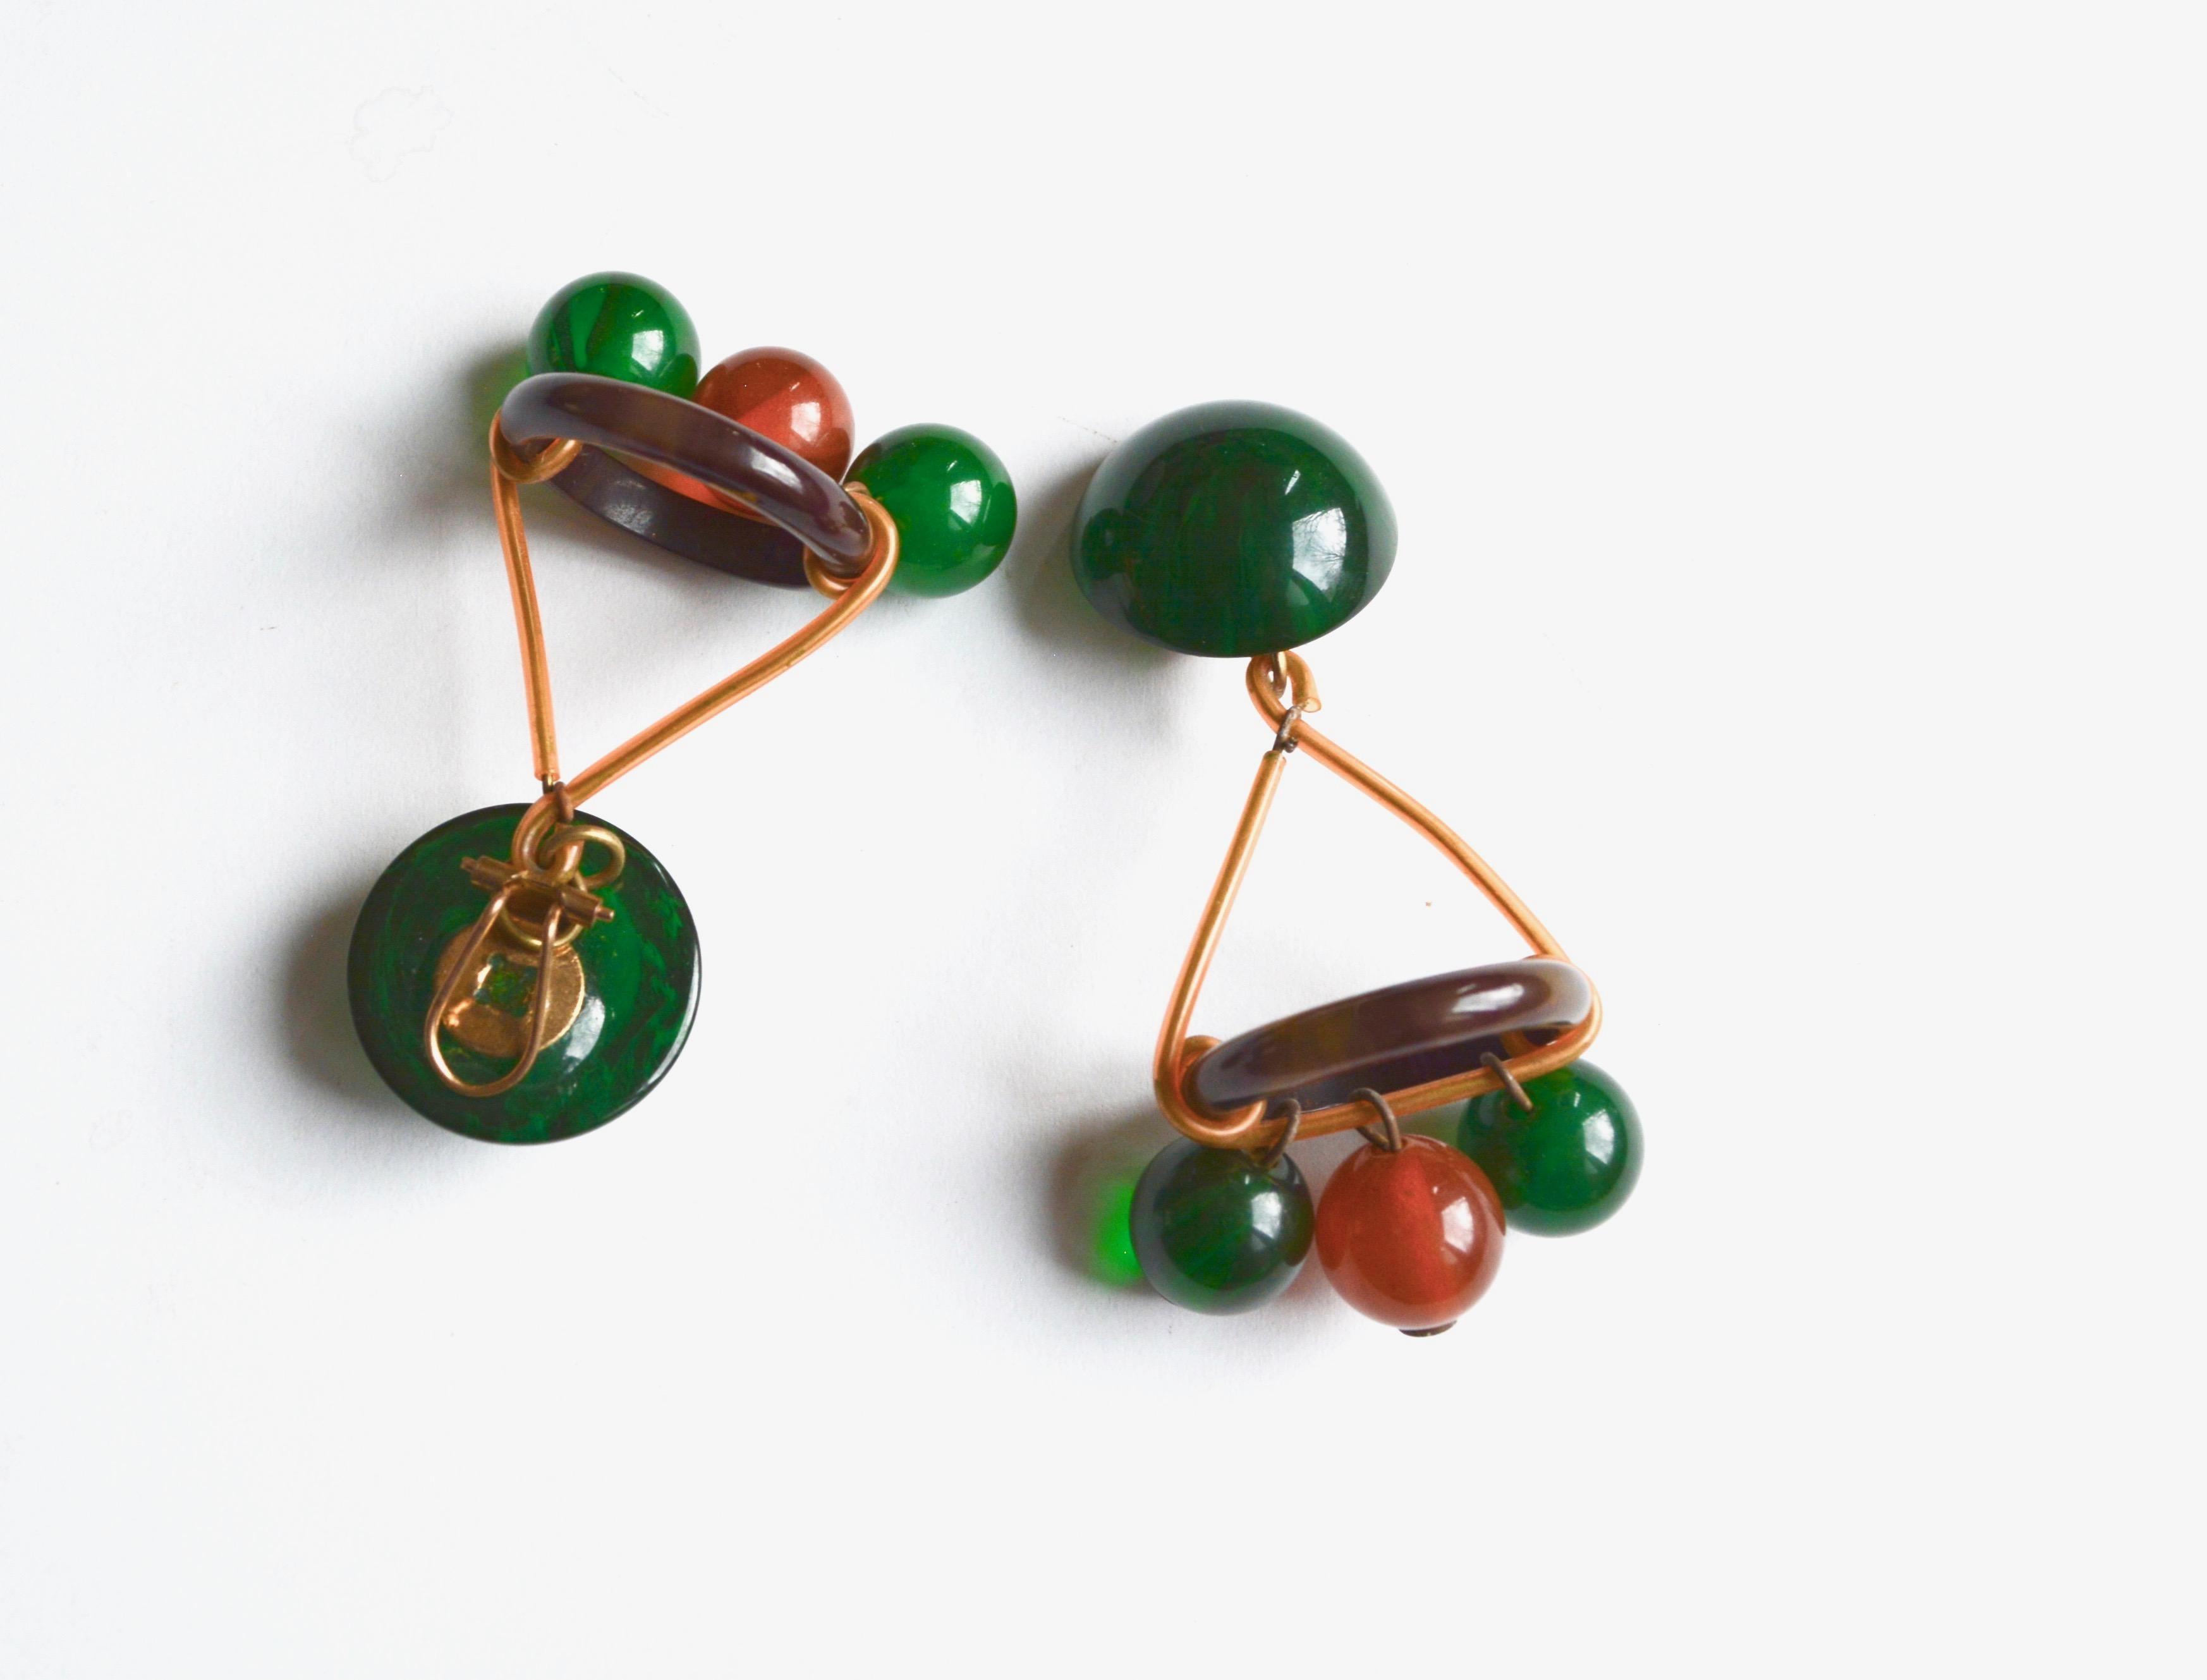 All original Bakelite circa 1930s earrings. Unmarked, but the clasp style is more European in construction. Measure 2.5